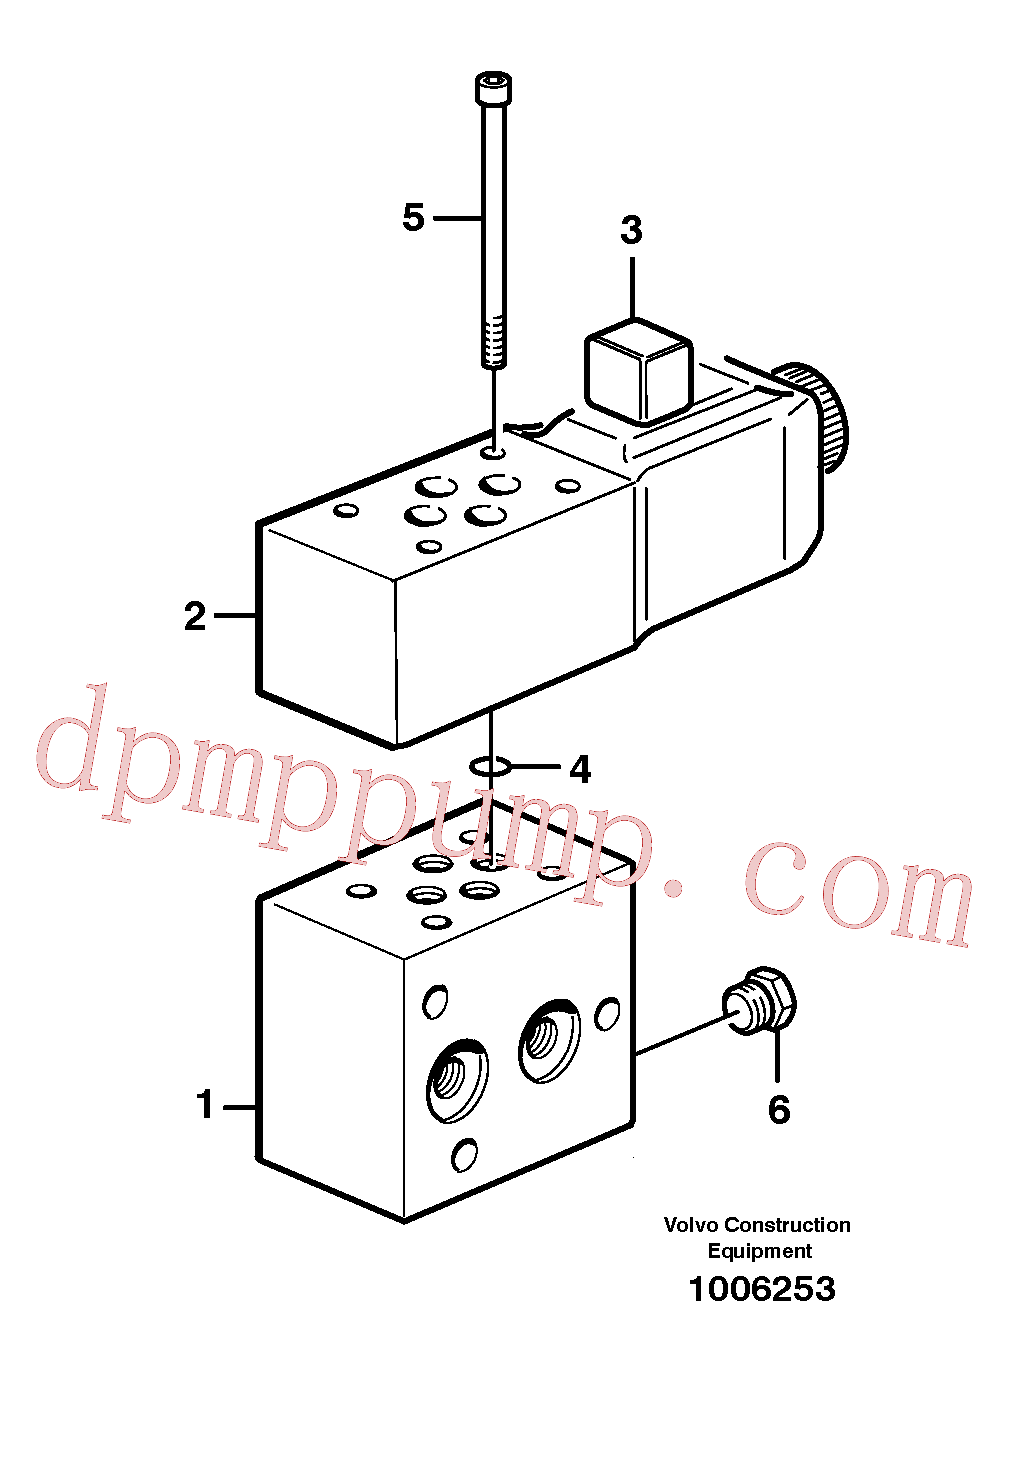 VOE11993637 for Volvo Connecting block(1006253 assembly)